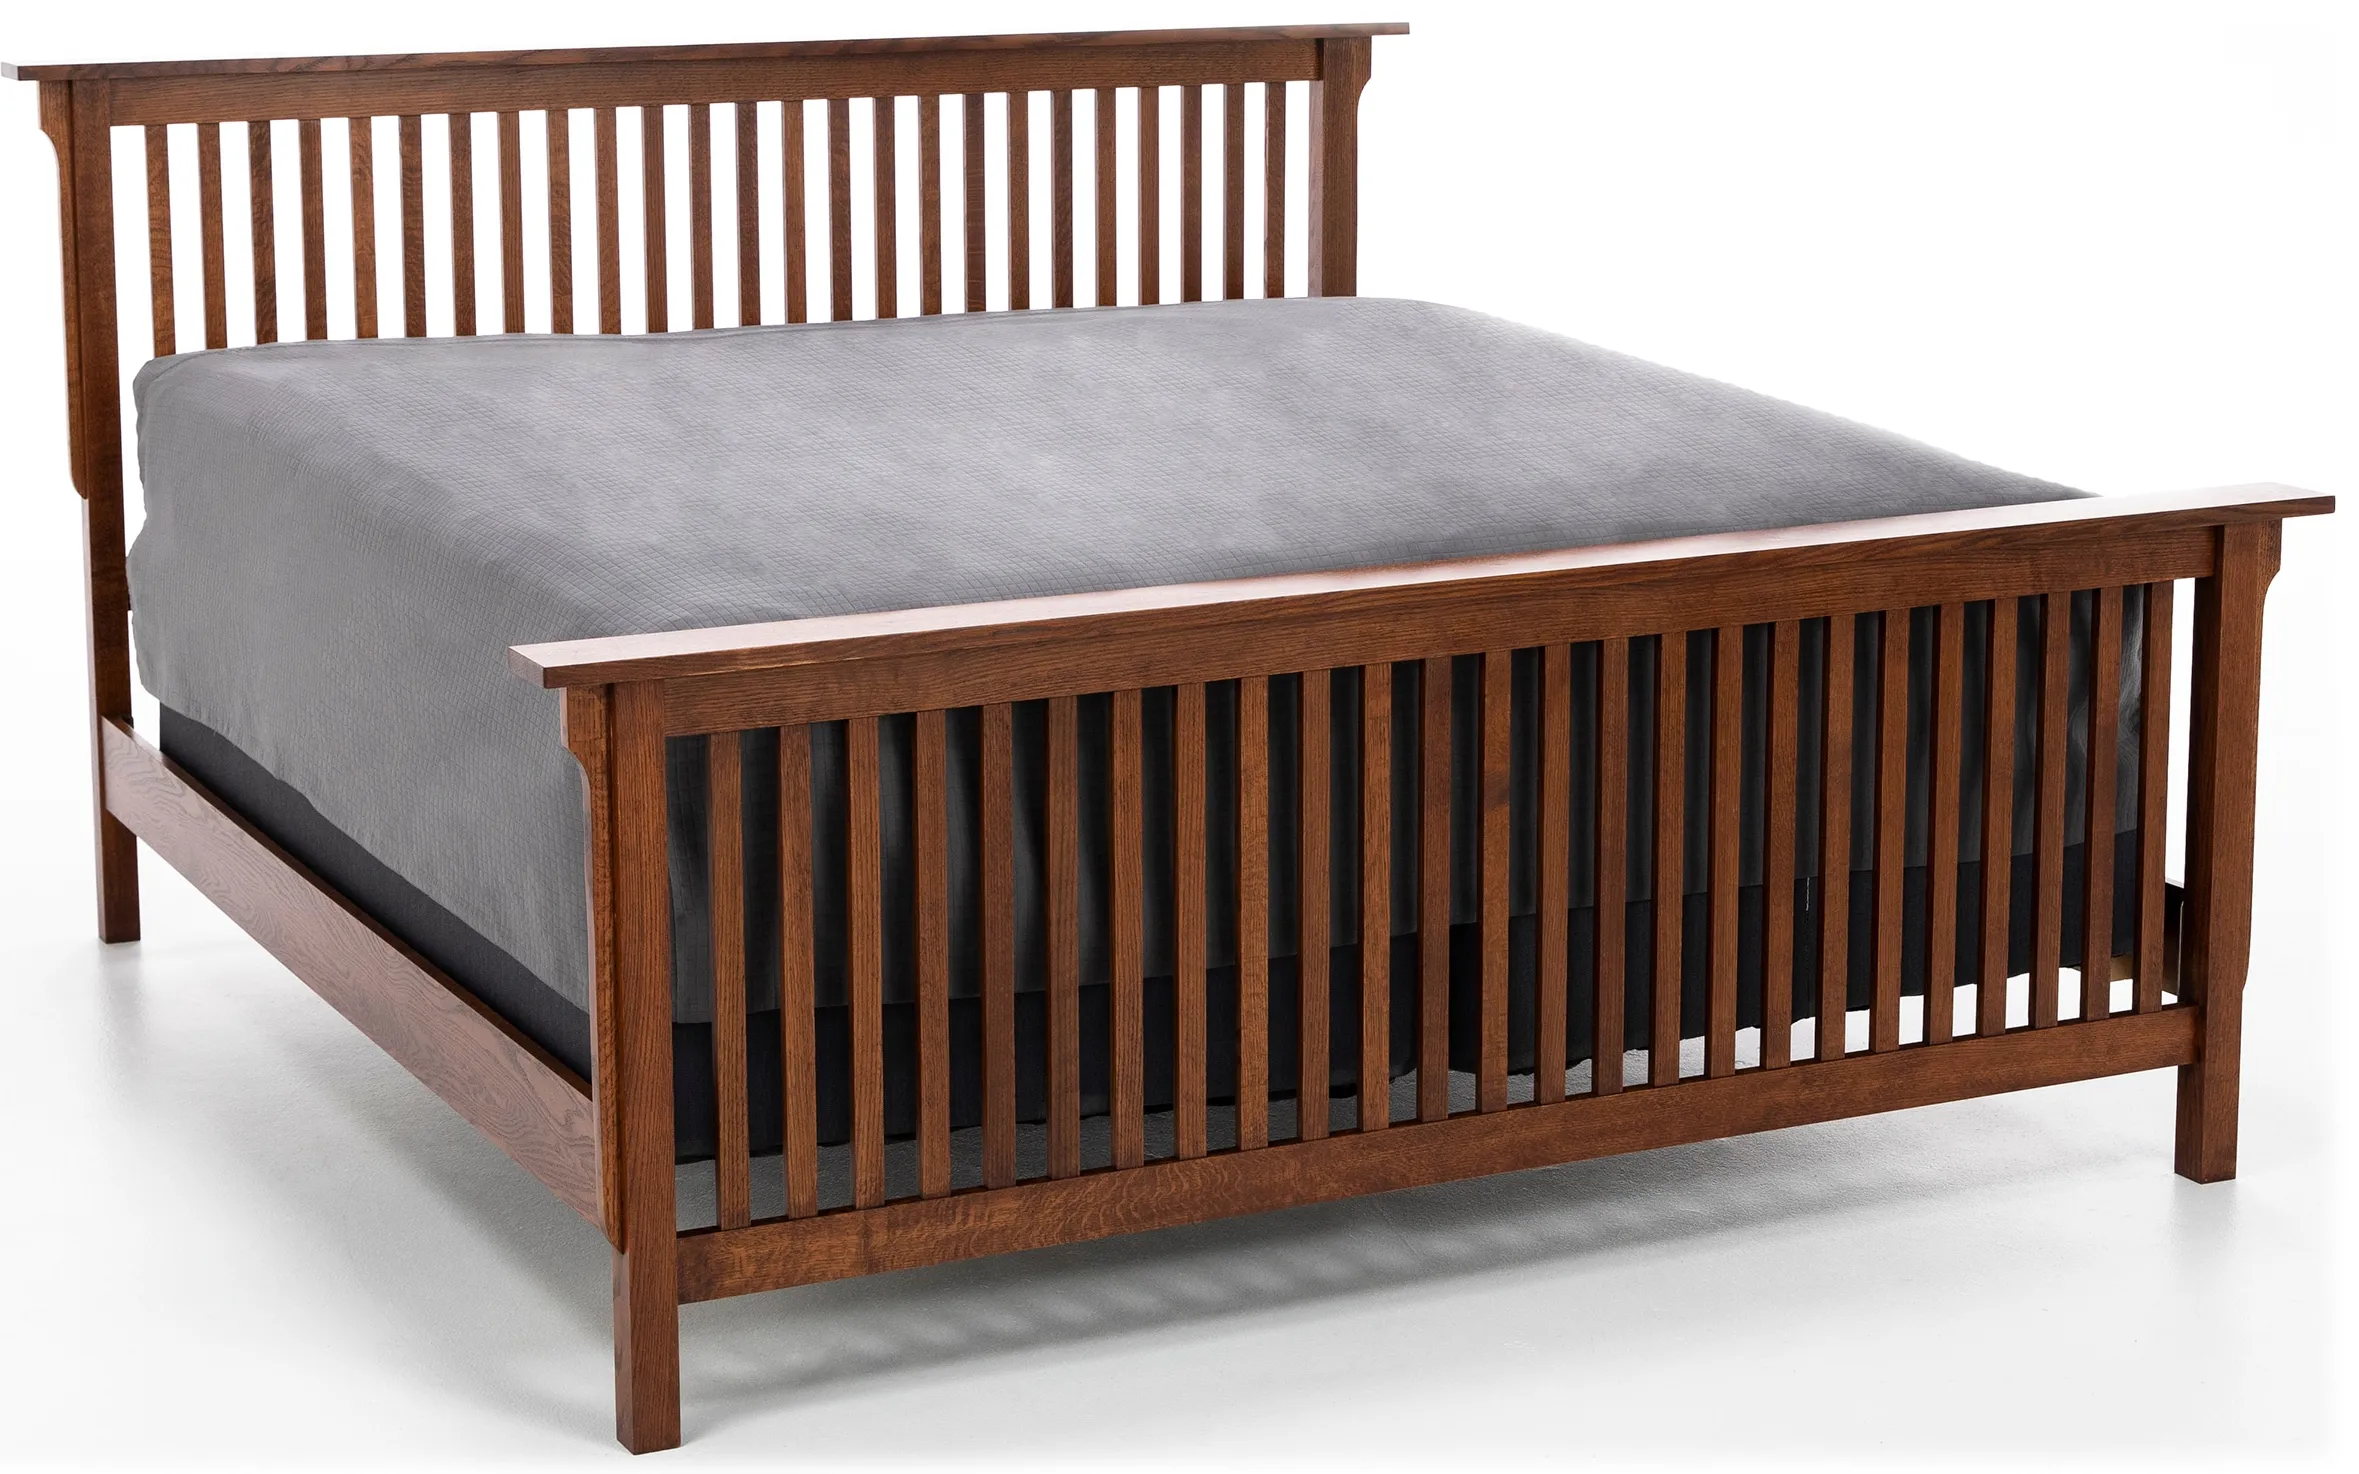 Witmer American Mission #80 King Slat Bed W/32" Footboard